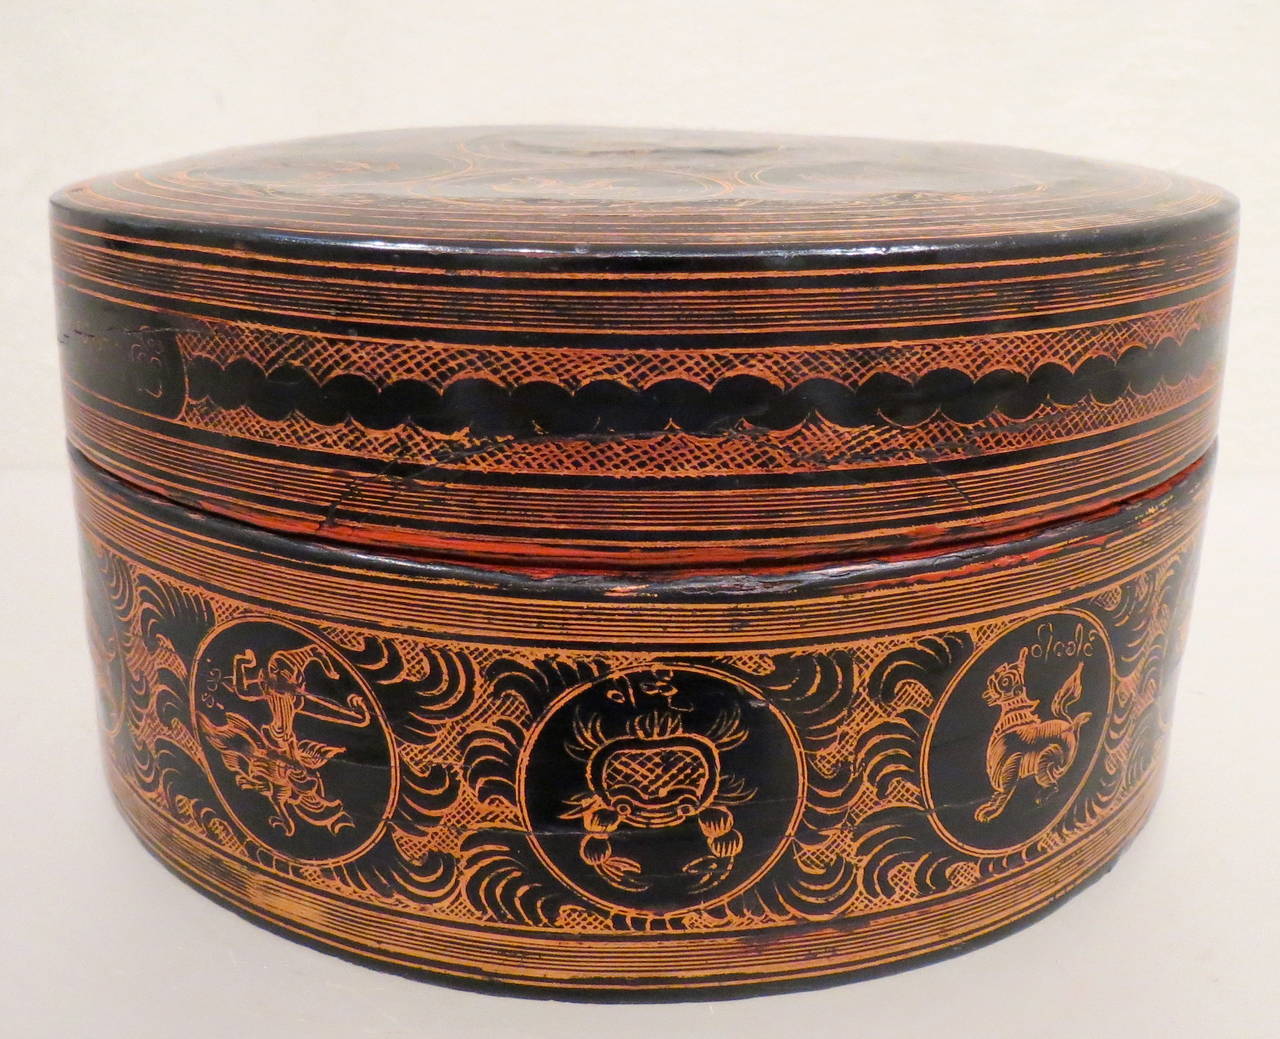 Cylindrical red lacquer betel-box, 'kun it,' with internal tray. This betel-box is made up of the following elements: A finely decorated lid; an internal tray with a heavy lip and red lacquer inside and orange/brown outside, Burma, late 19th century.